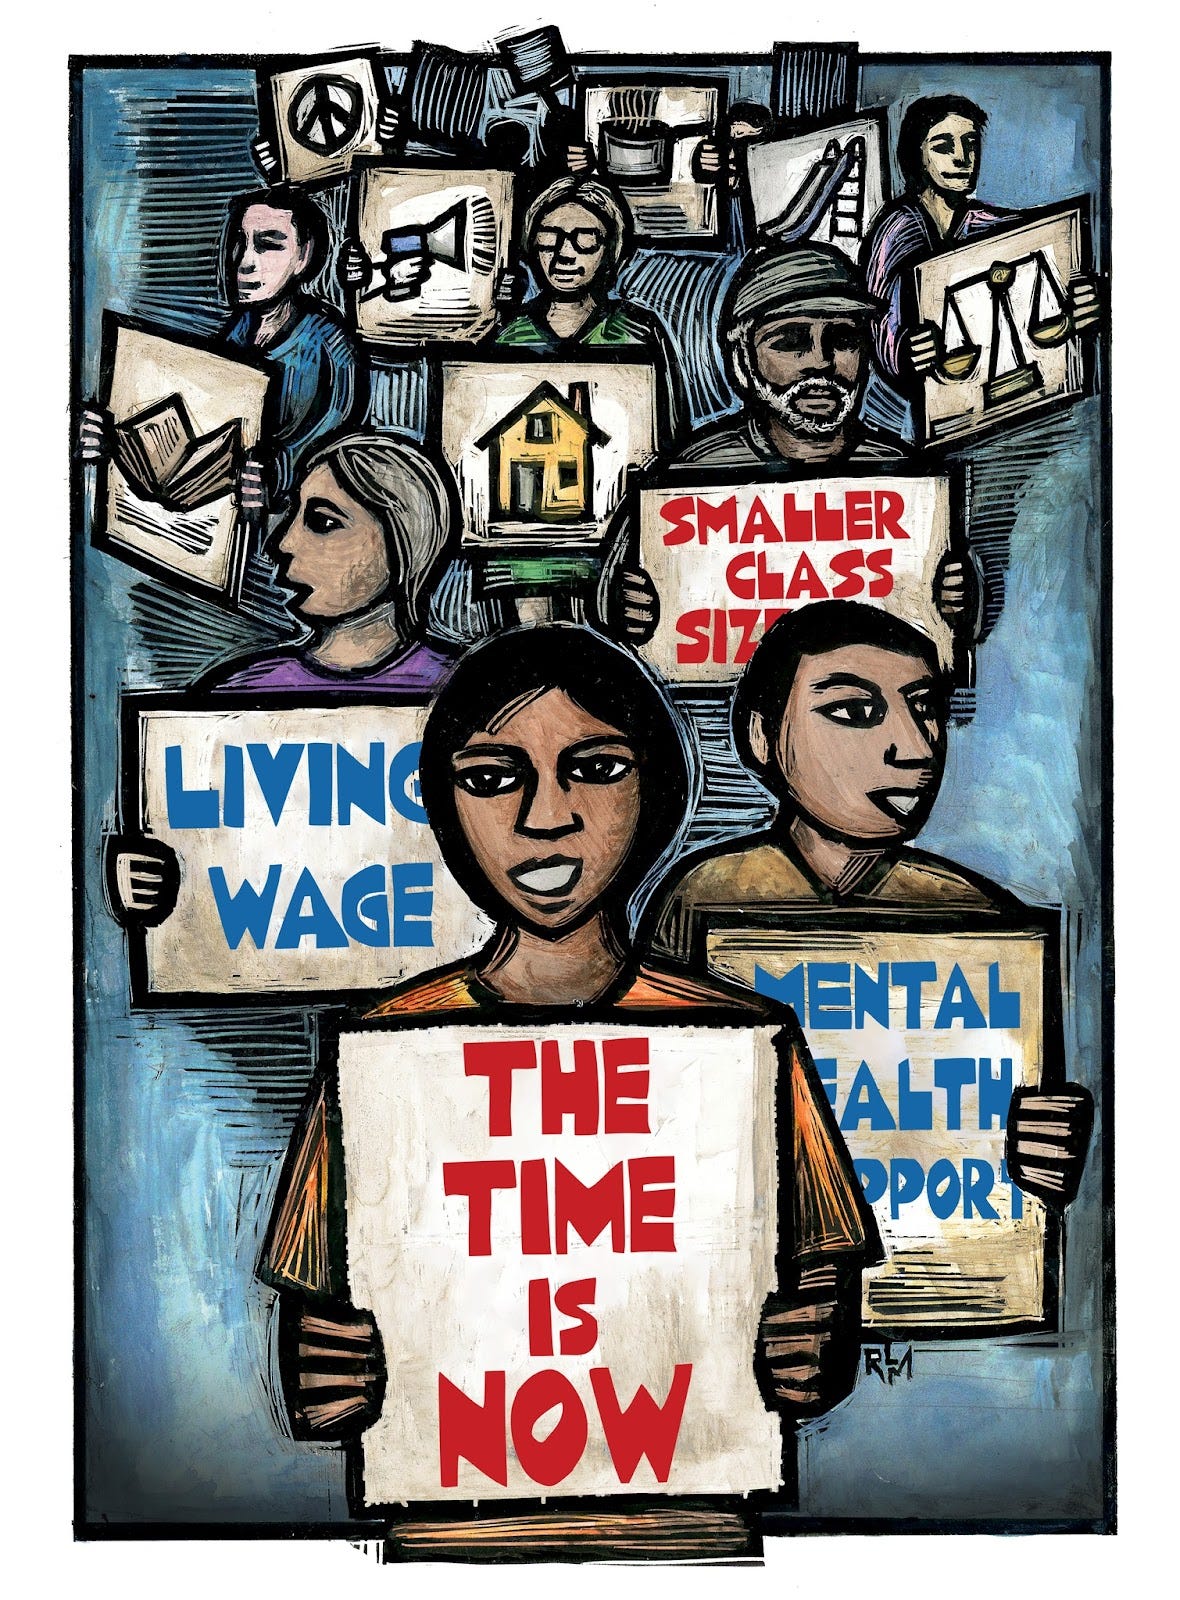 An artwork depicting Black and Brown people holding up protest signs reading "living wage now" "the time is now"